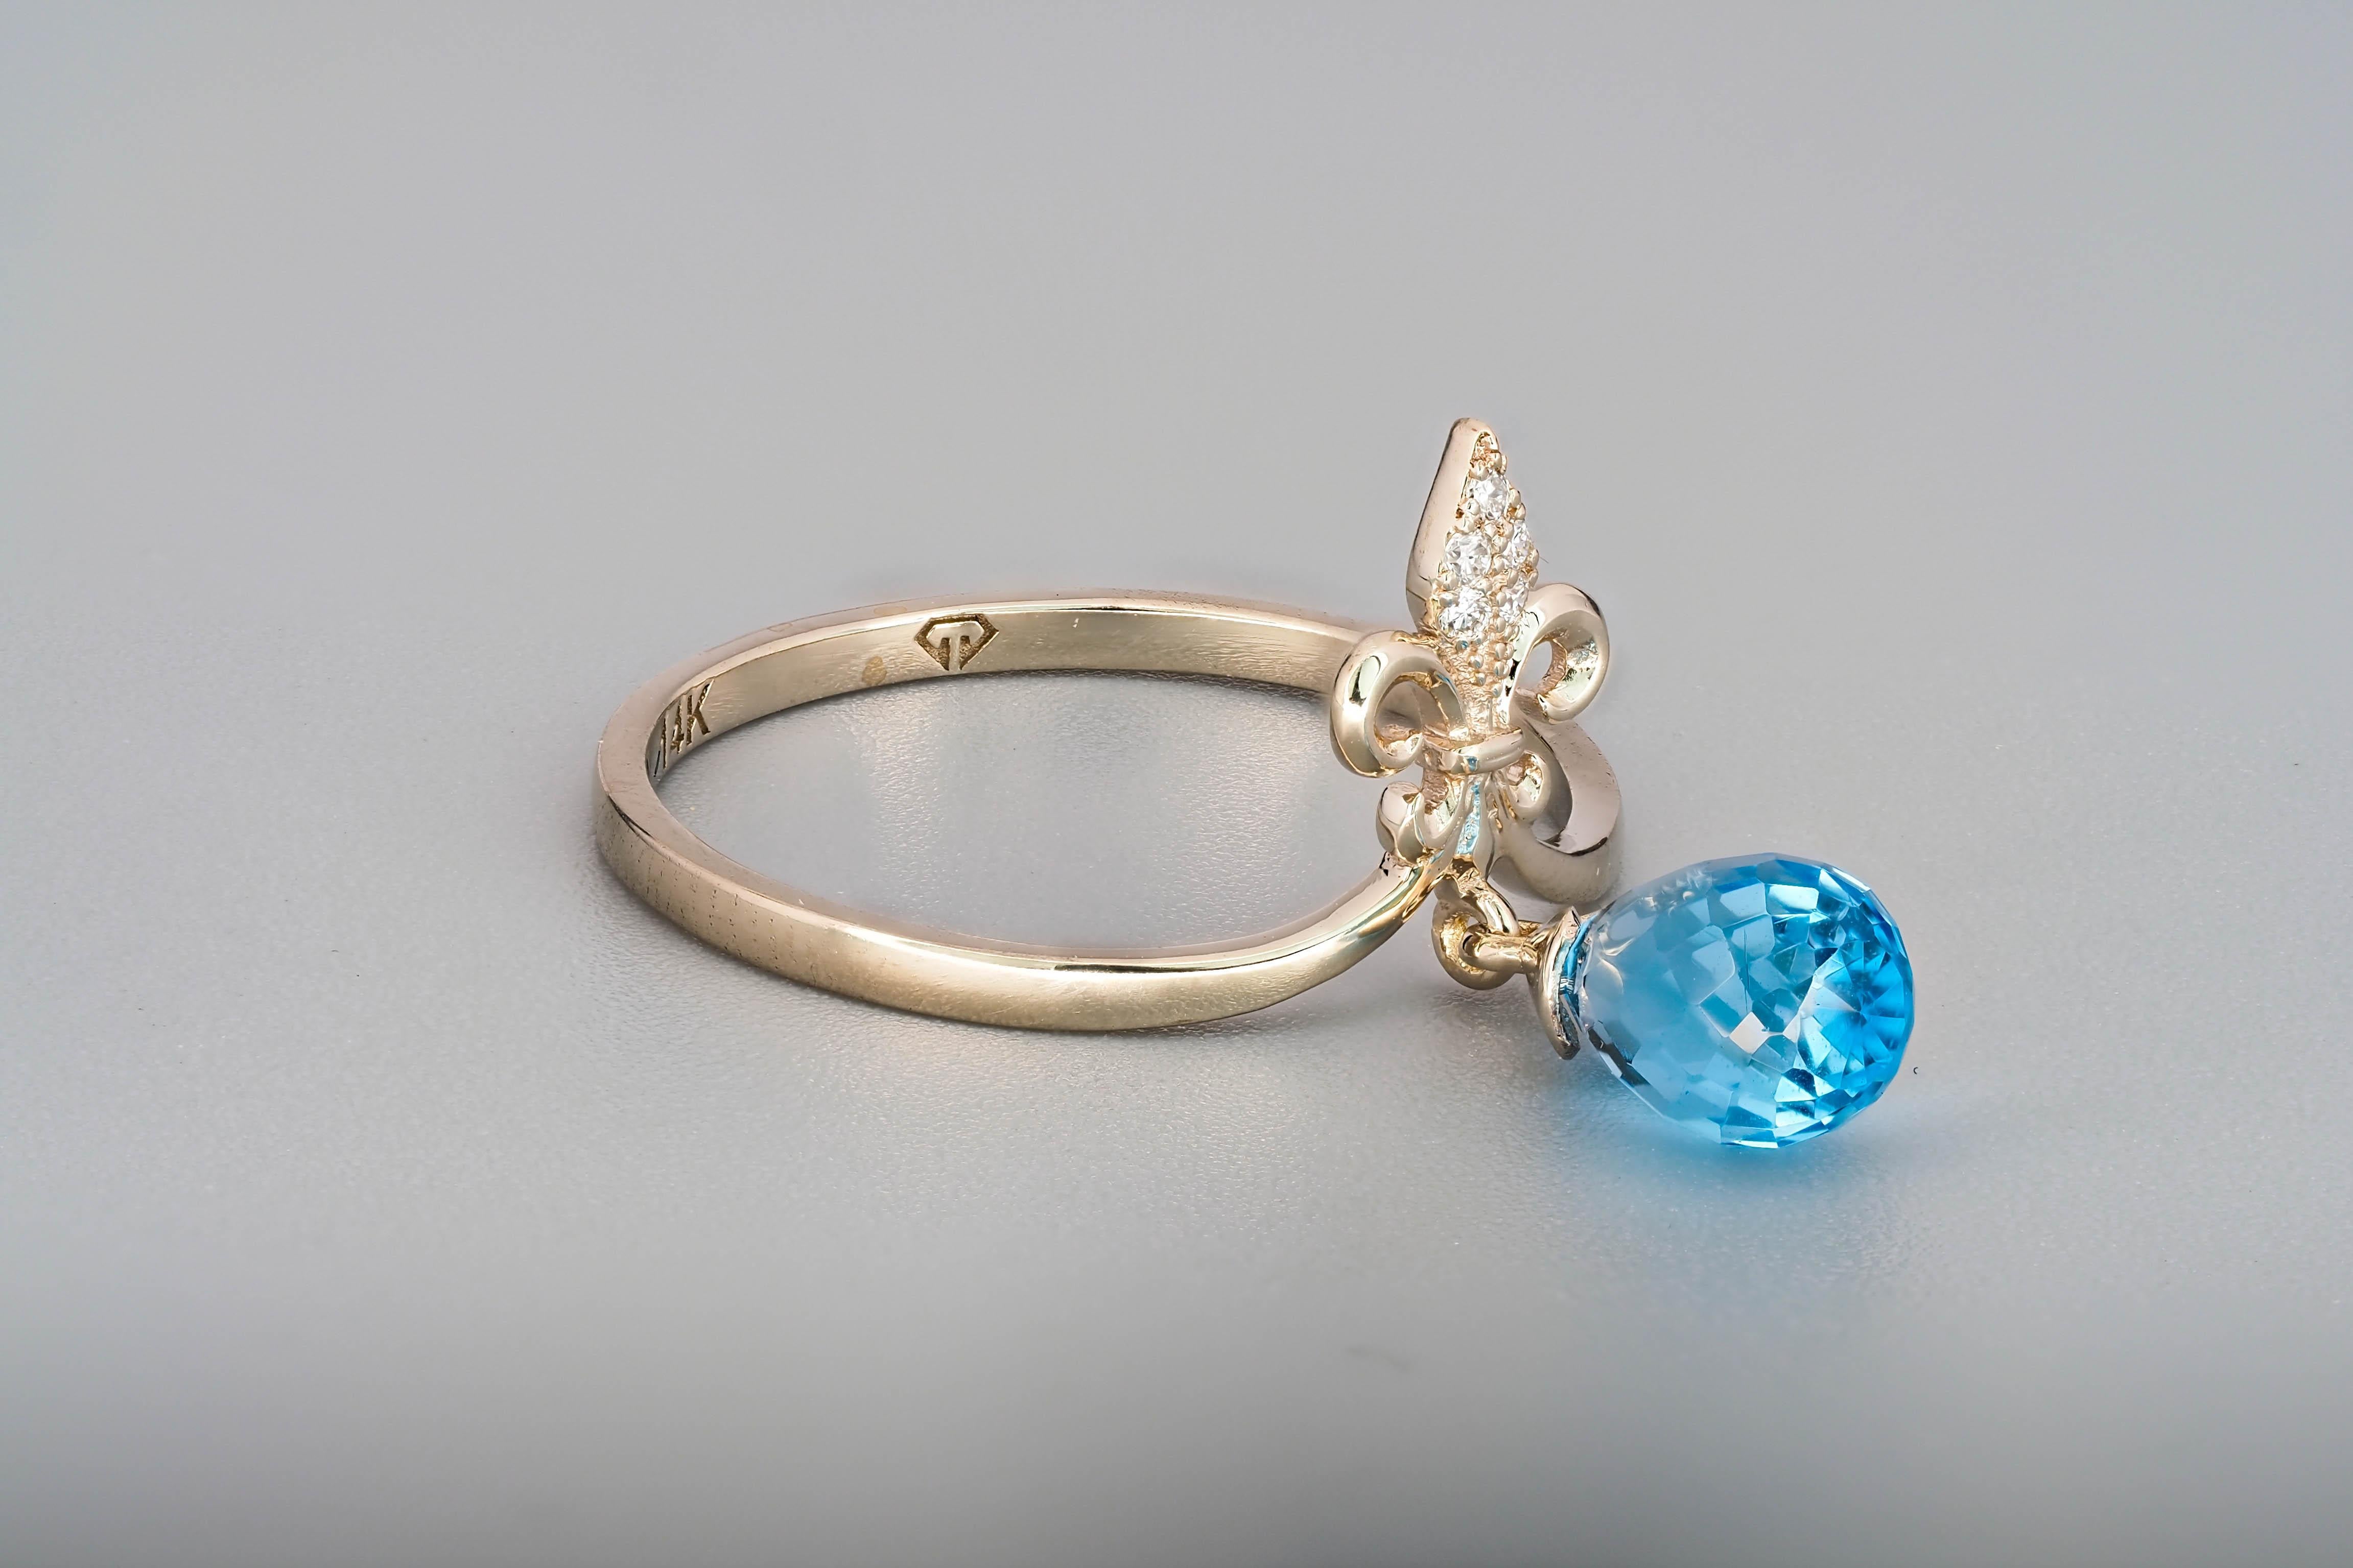 For Sale:  14k Gold Ring with Briolette Cut Topaz and Diamonds 6